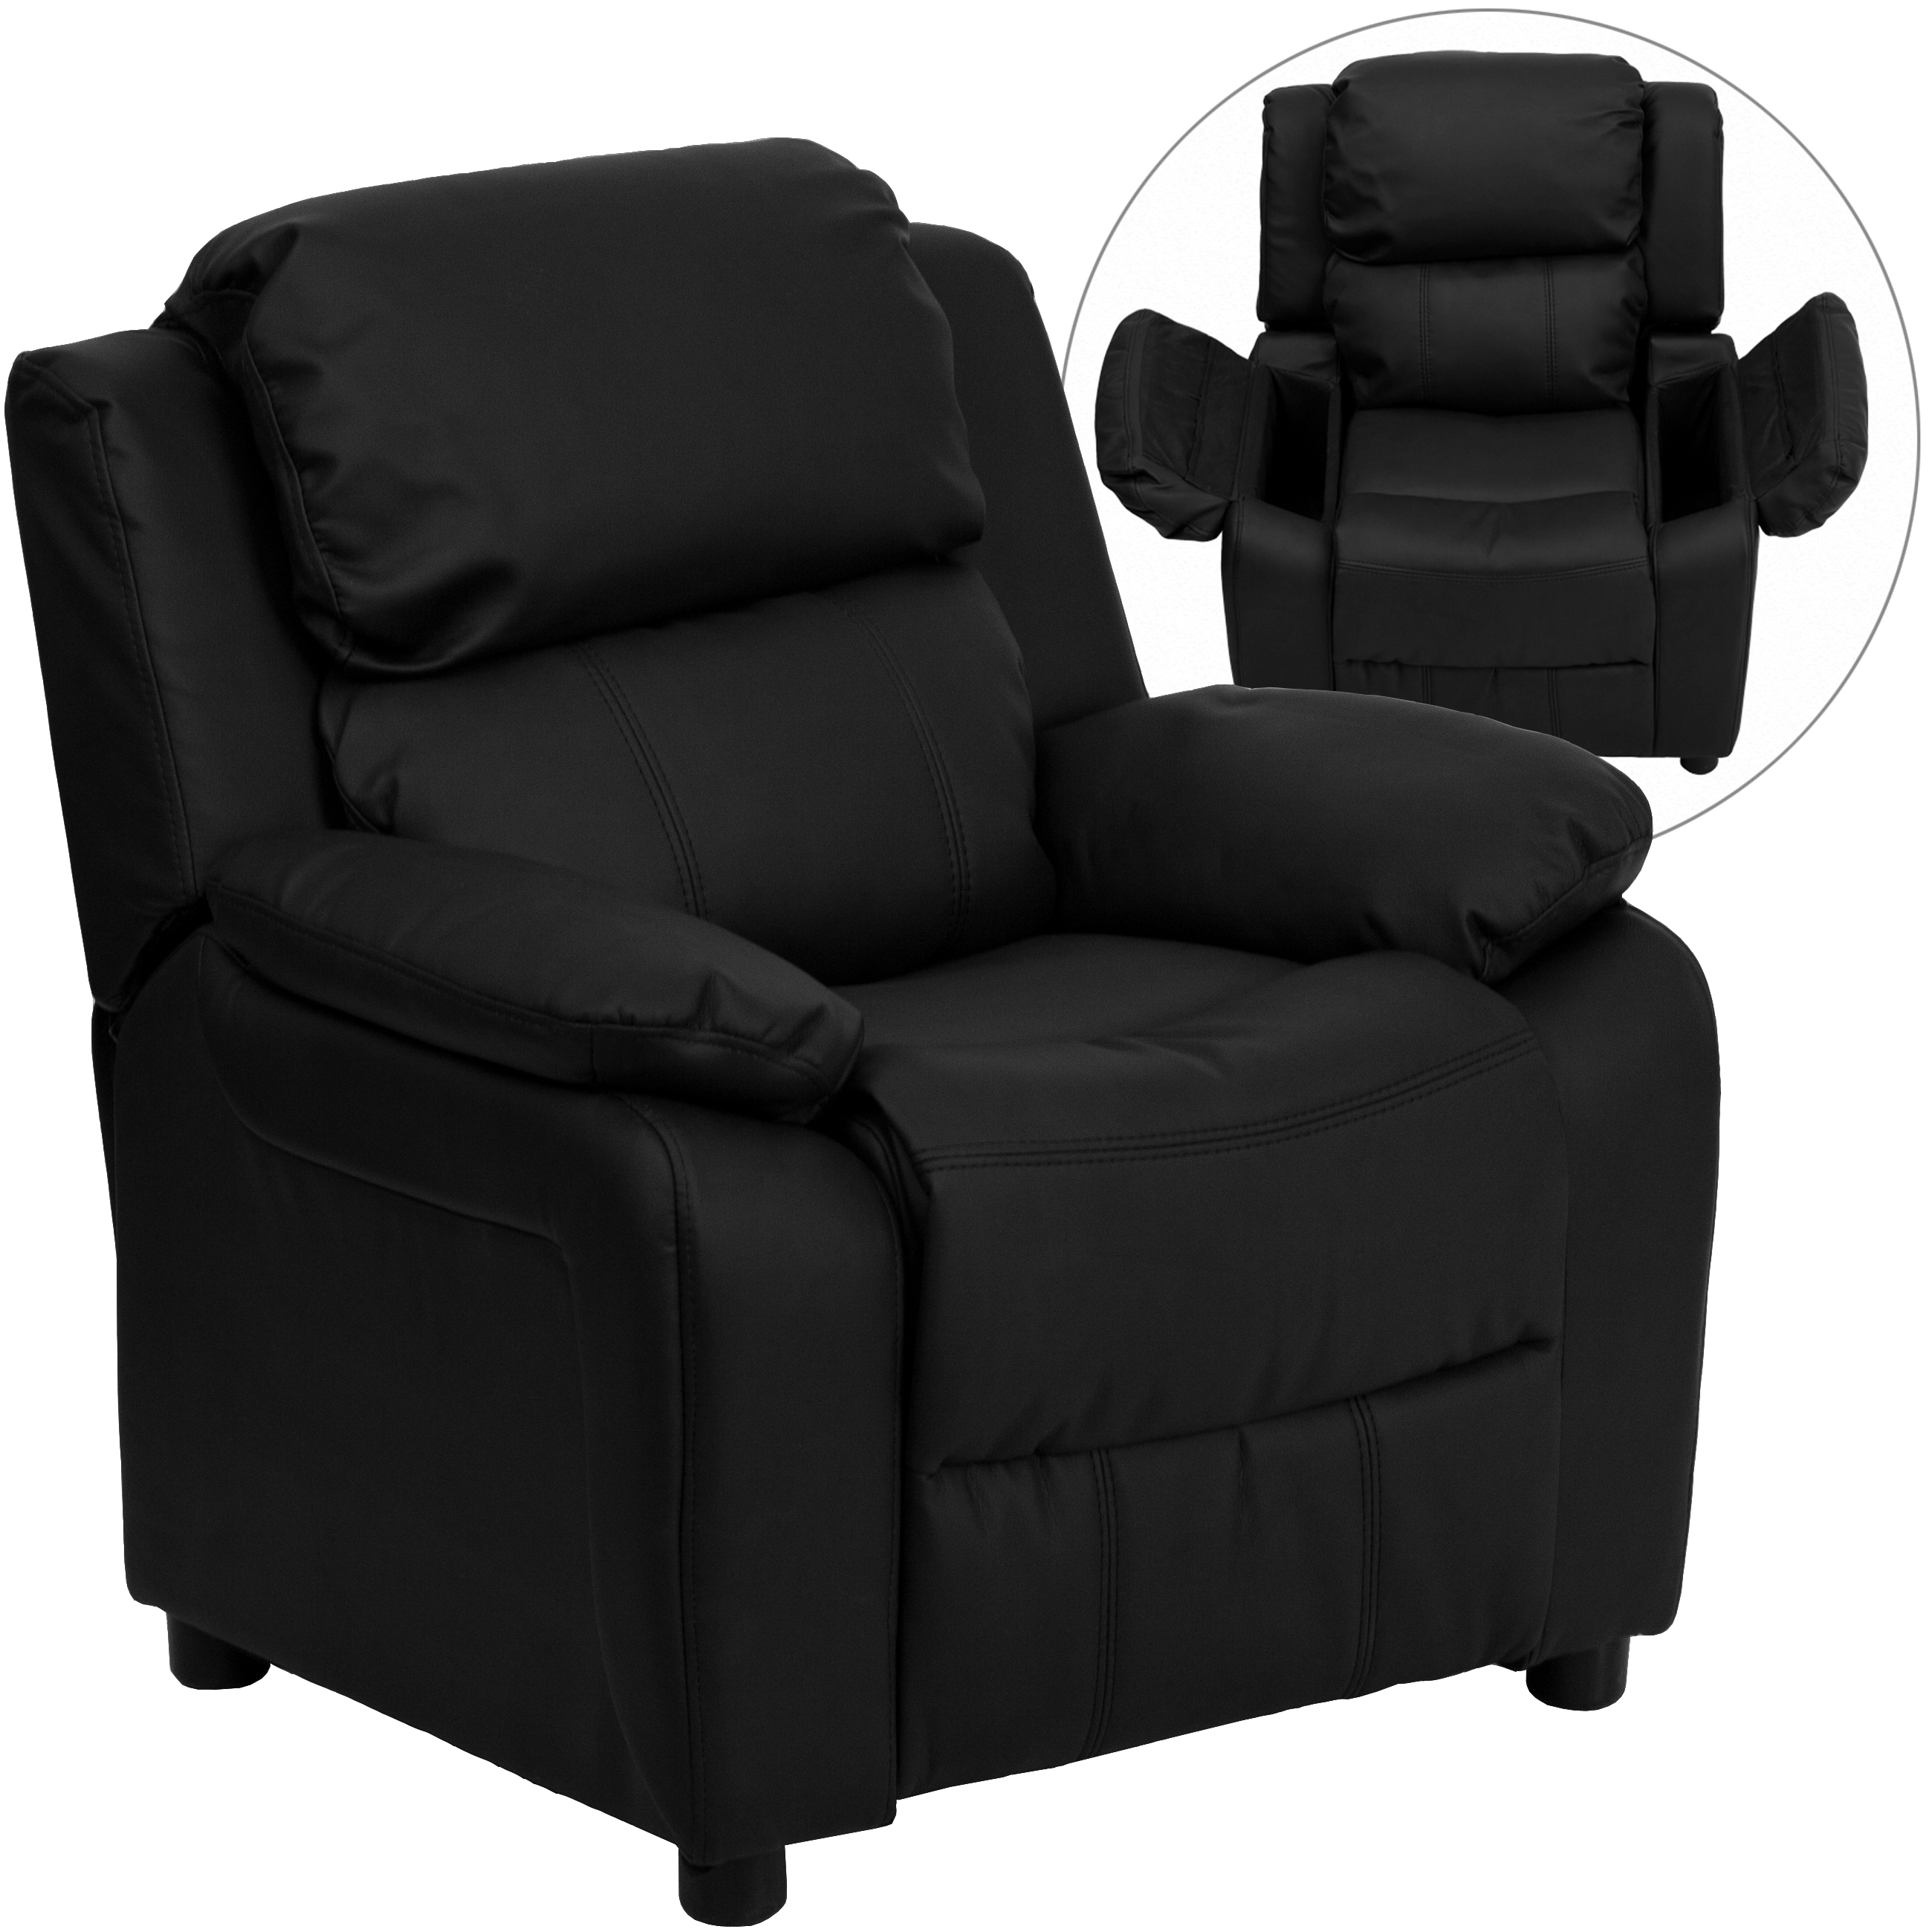 Flash Furniture Deluxe Padded Contemporary Black LeatherSoft Kids Recliner with Storage Arms - image 2 of 13